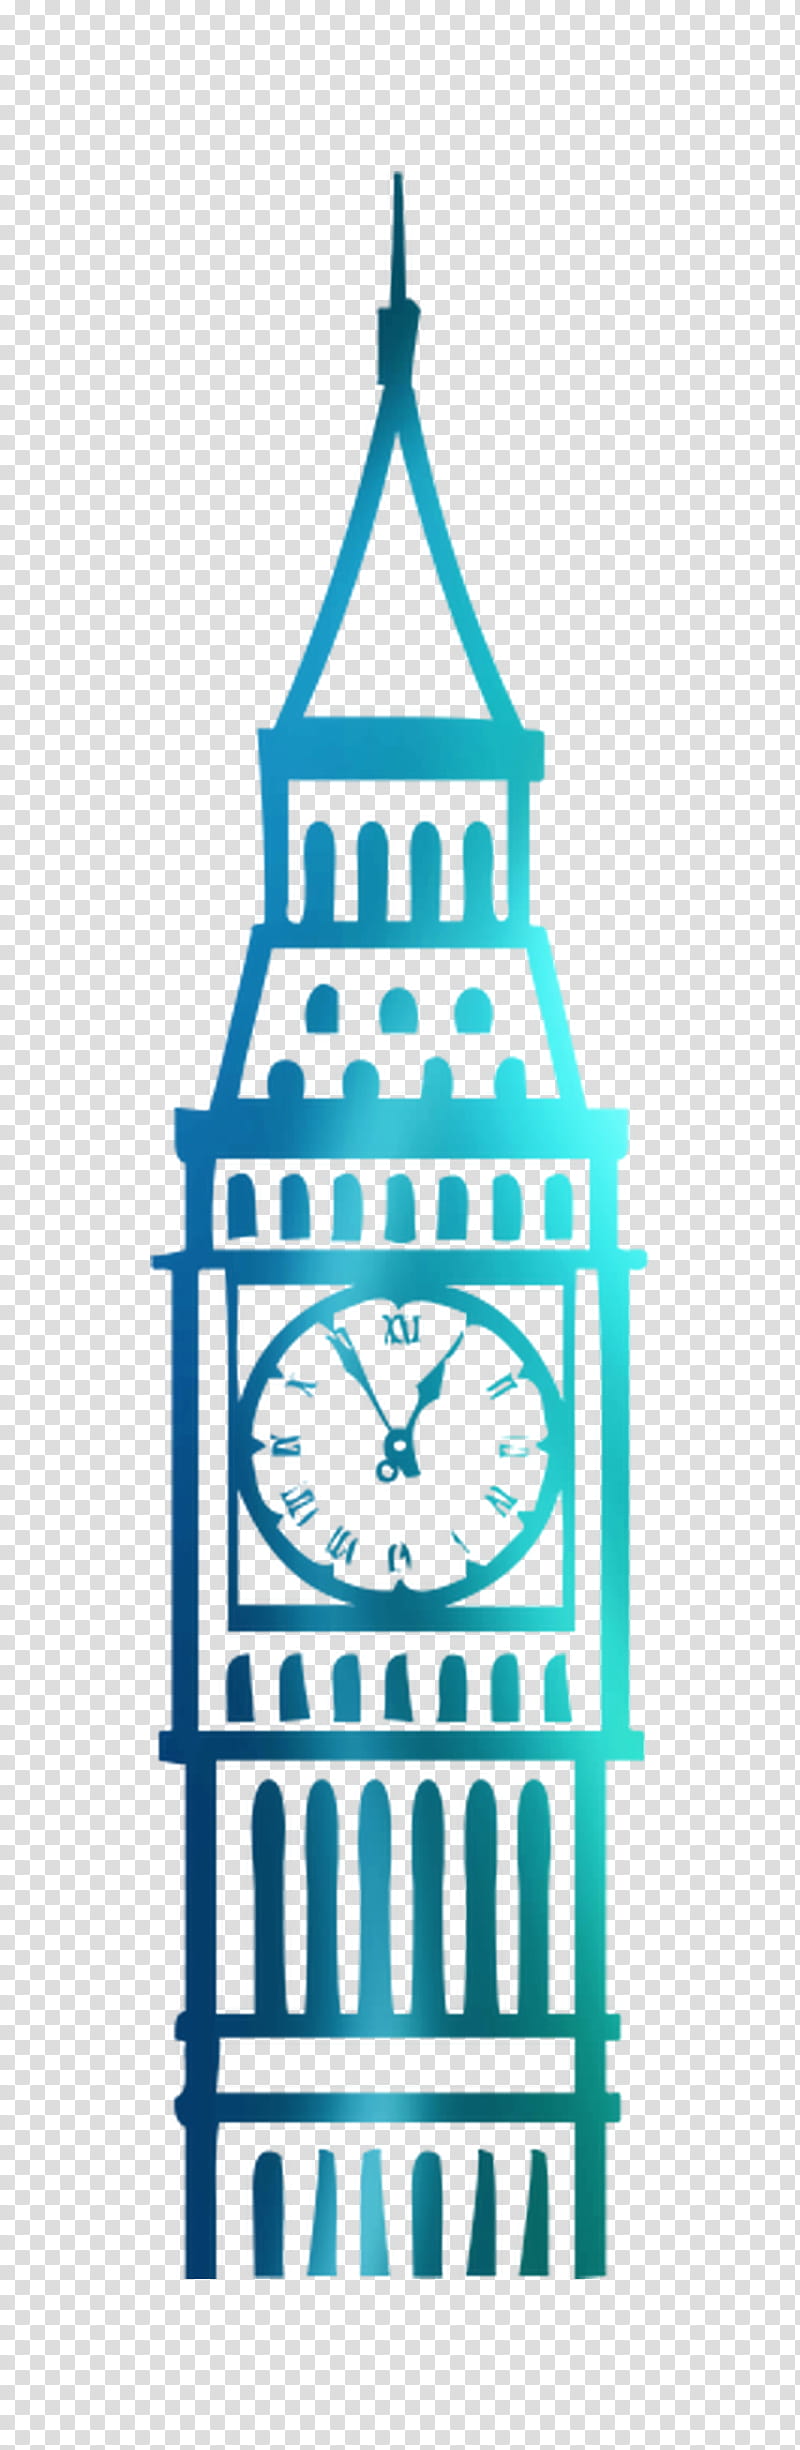 Birthday Party, Big Ben, Drawing, Birthday
, Diagram, London, Turquoise, Clock Tower transparent background PNG clipart